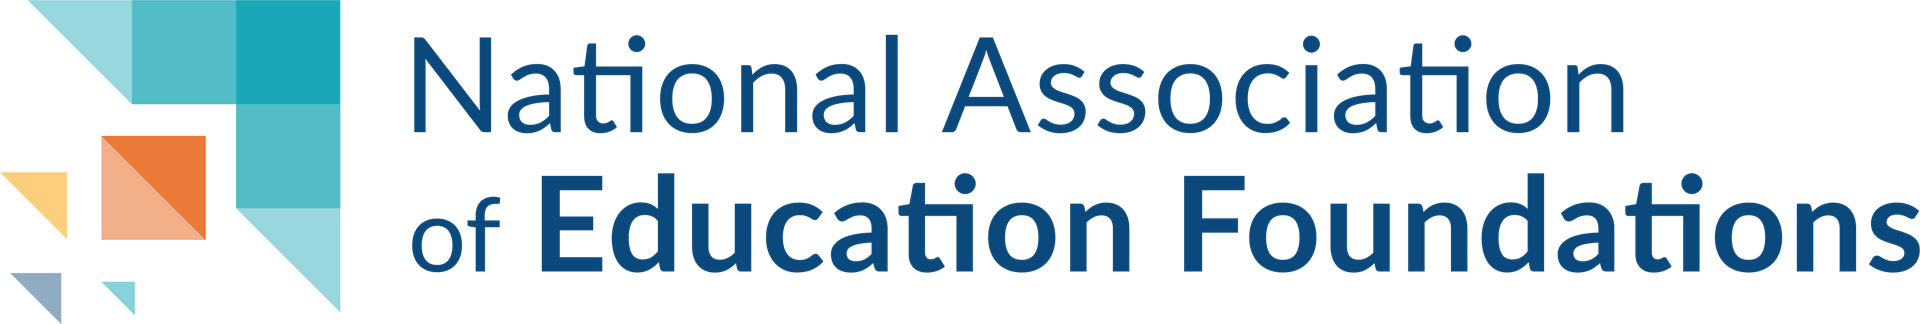 National Association of Education Foundations